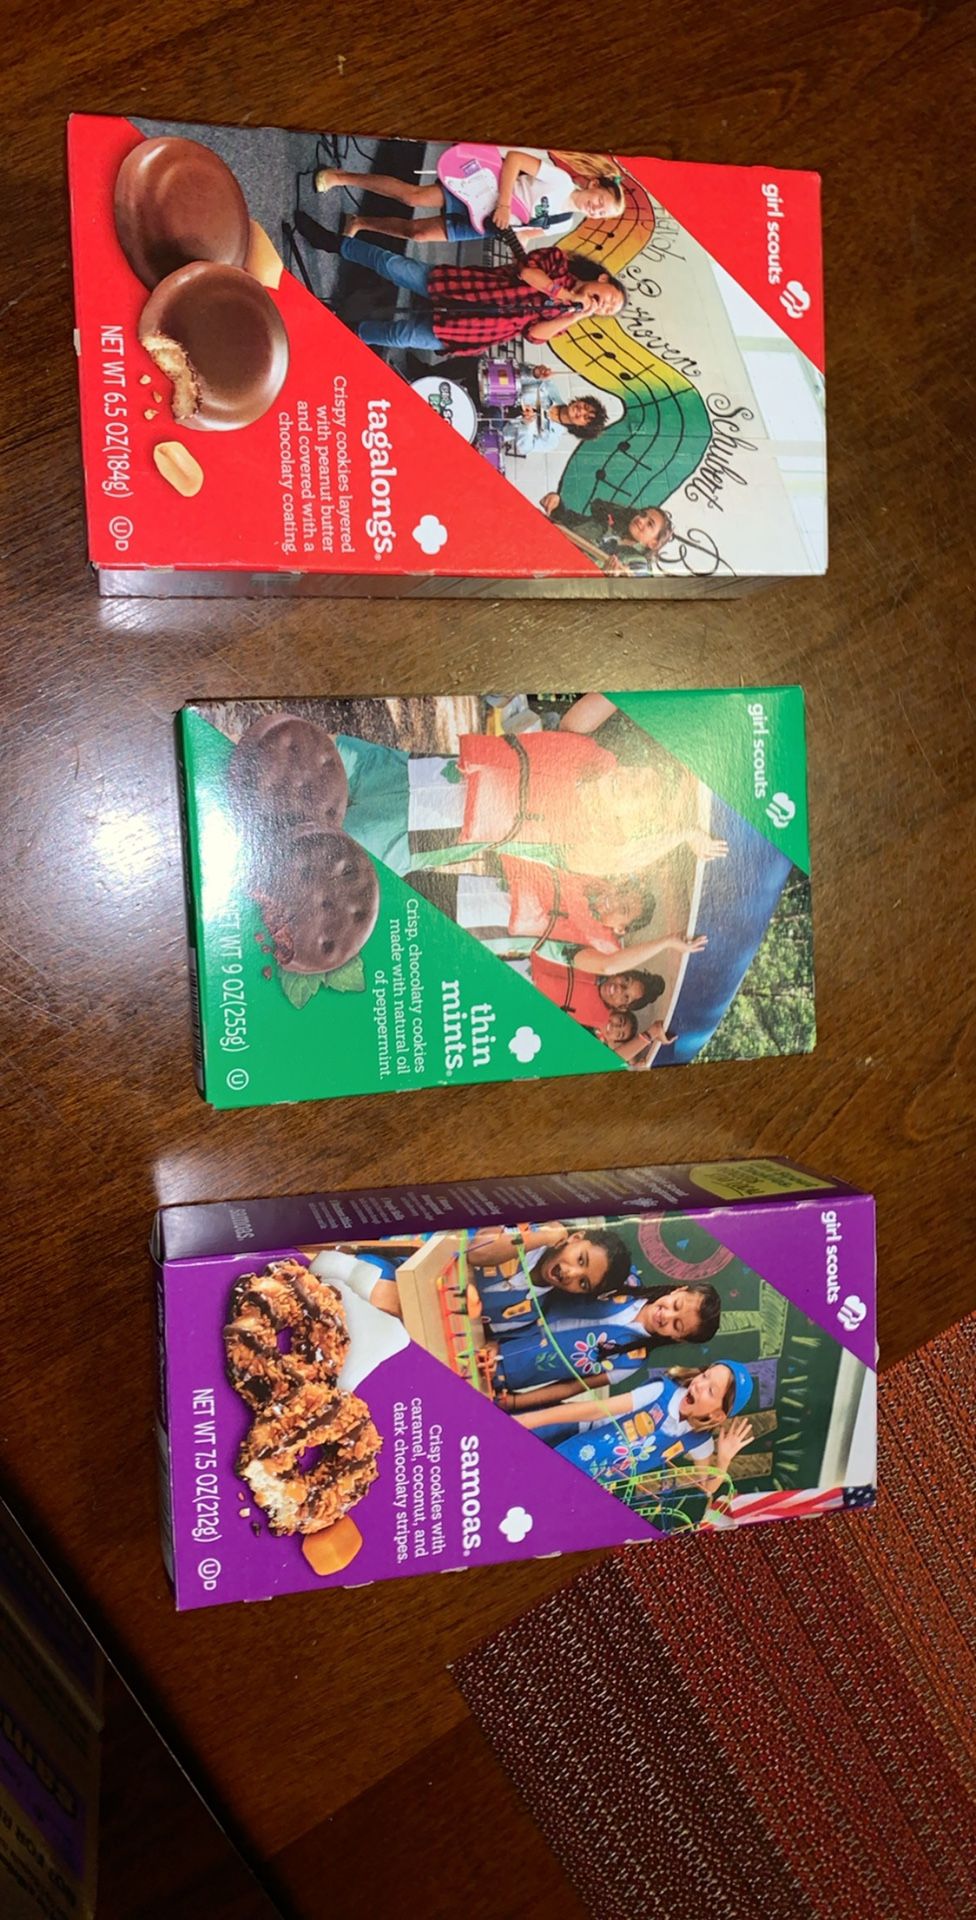 Girl Scout cookies